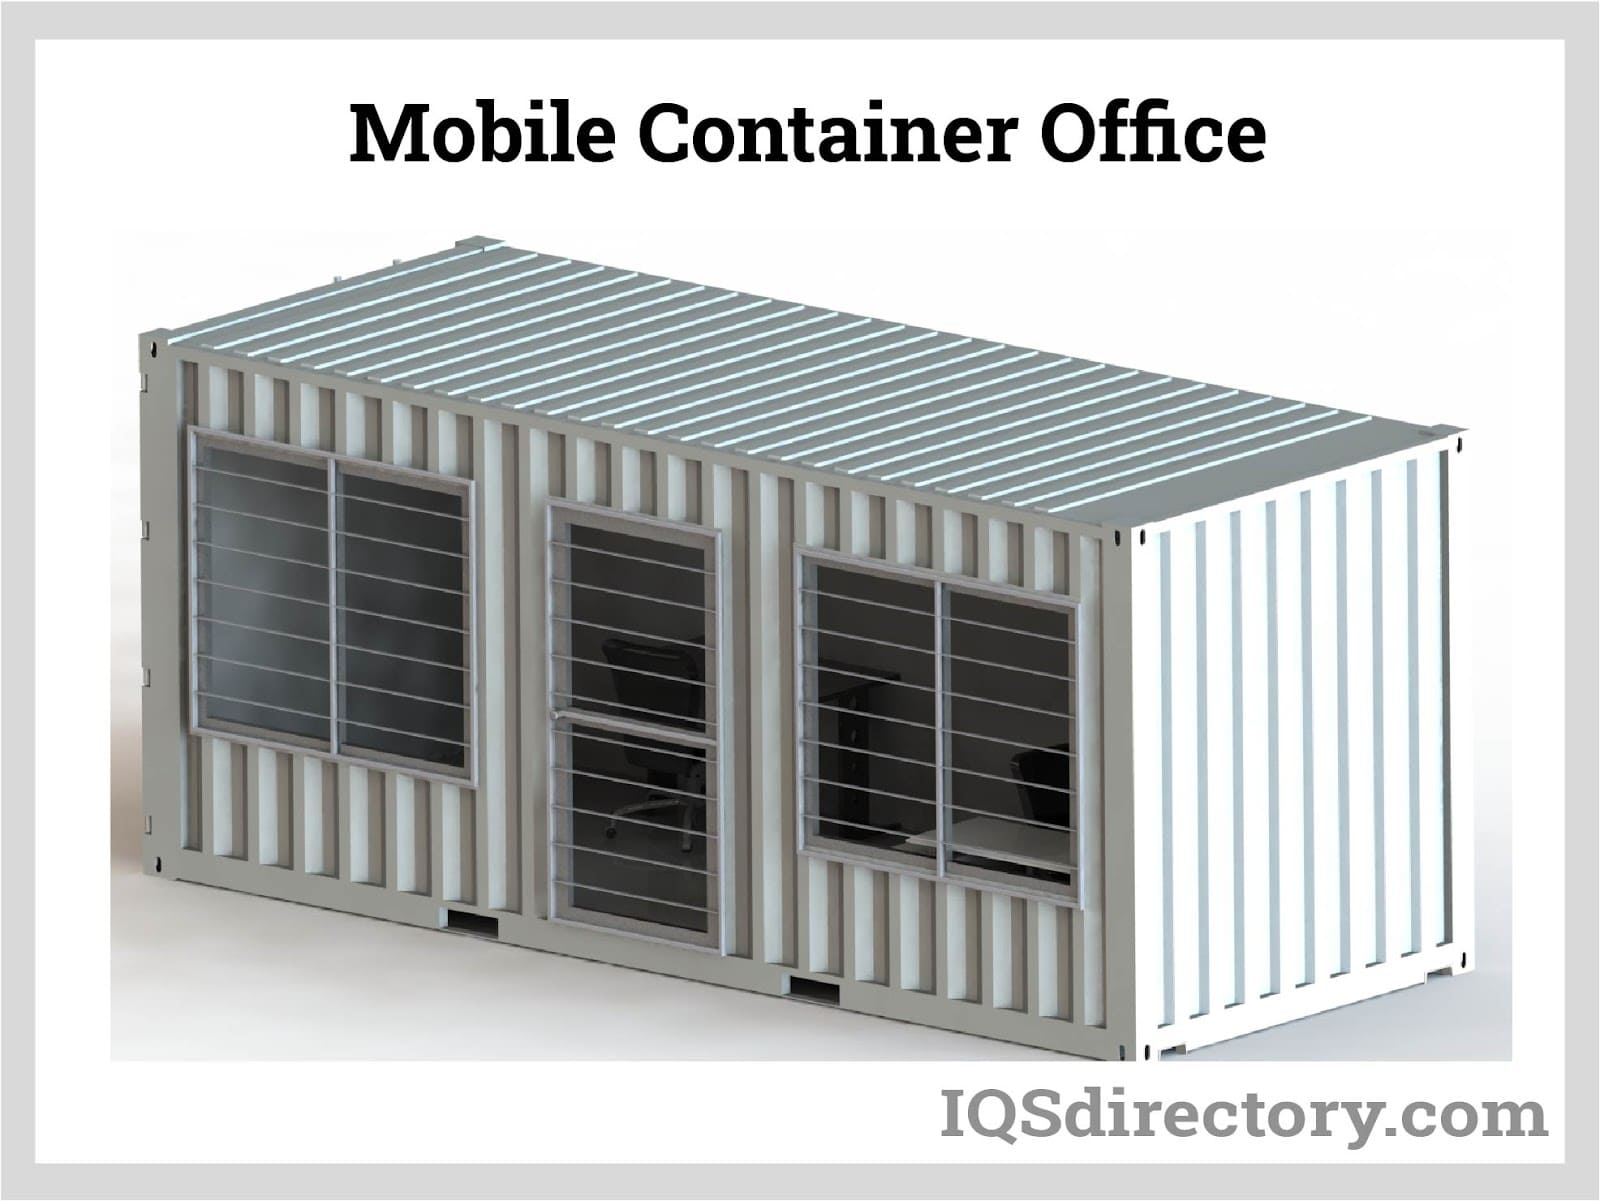 Mobile Container Offices